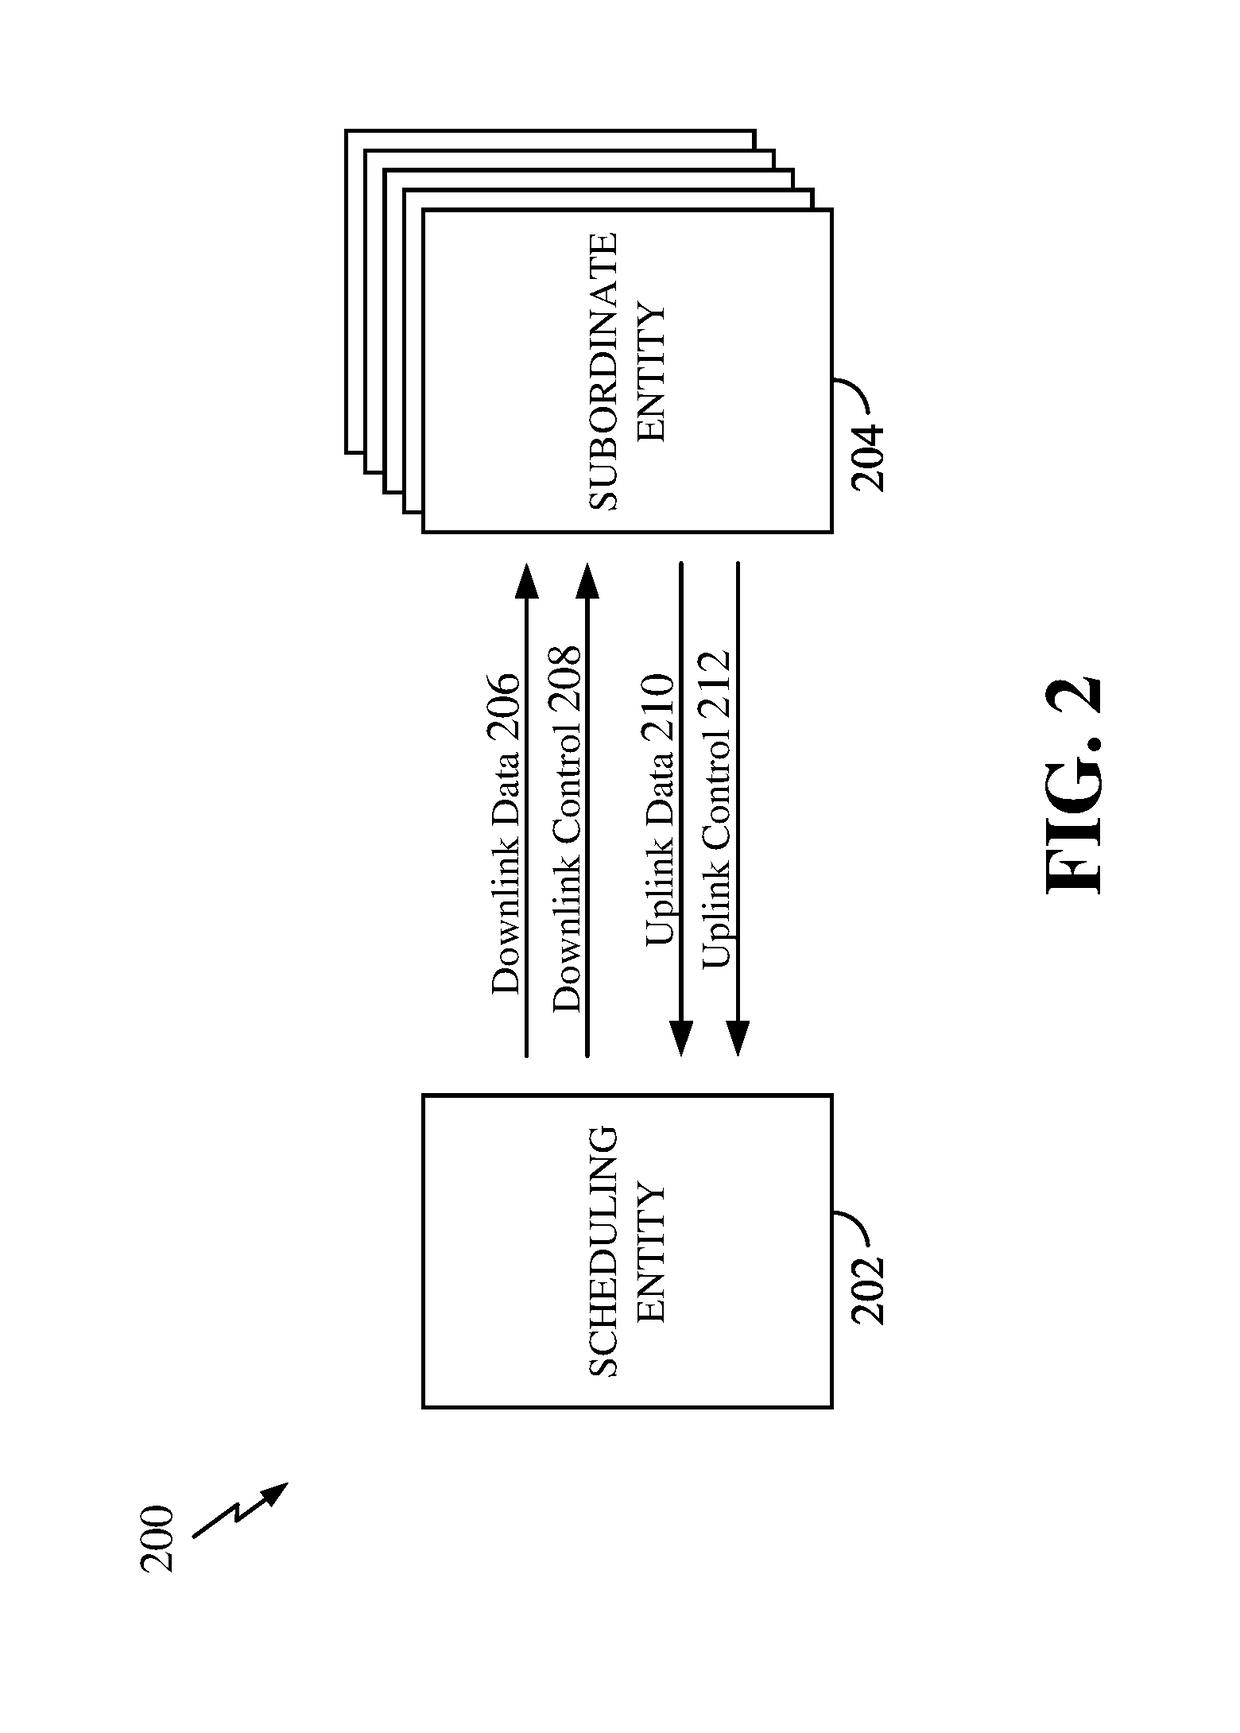 Configurable subframe structures in wireless communication